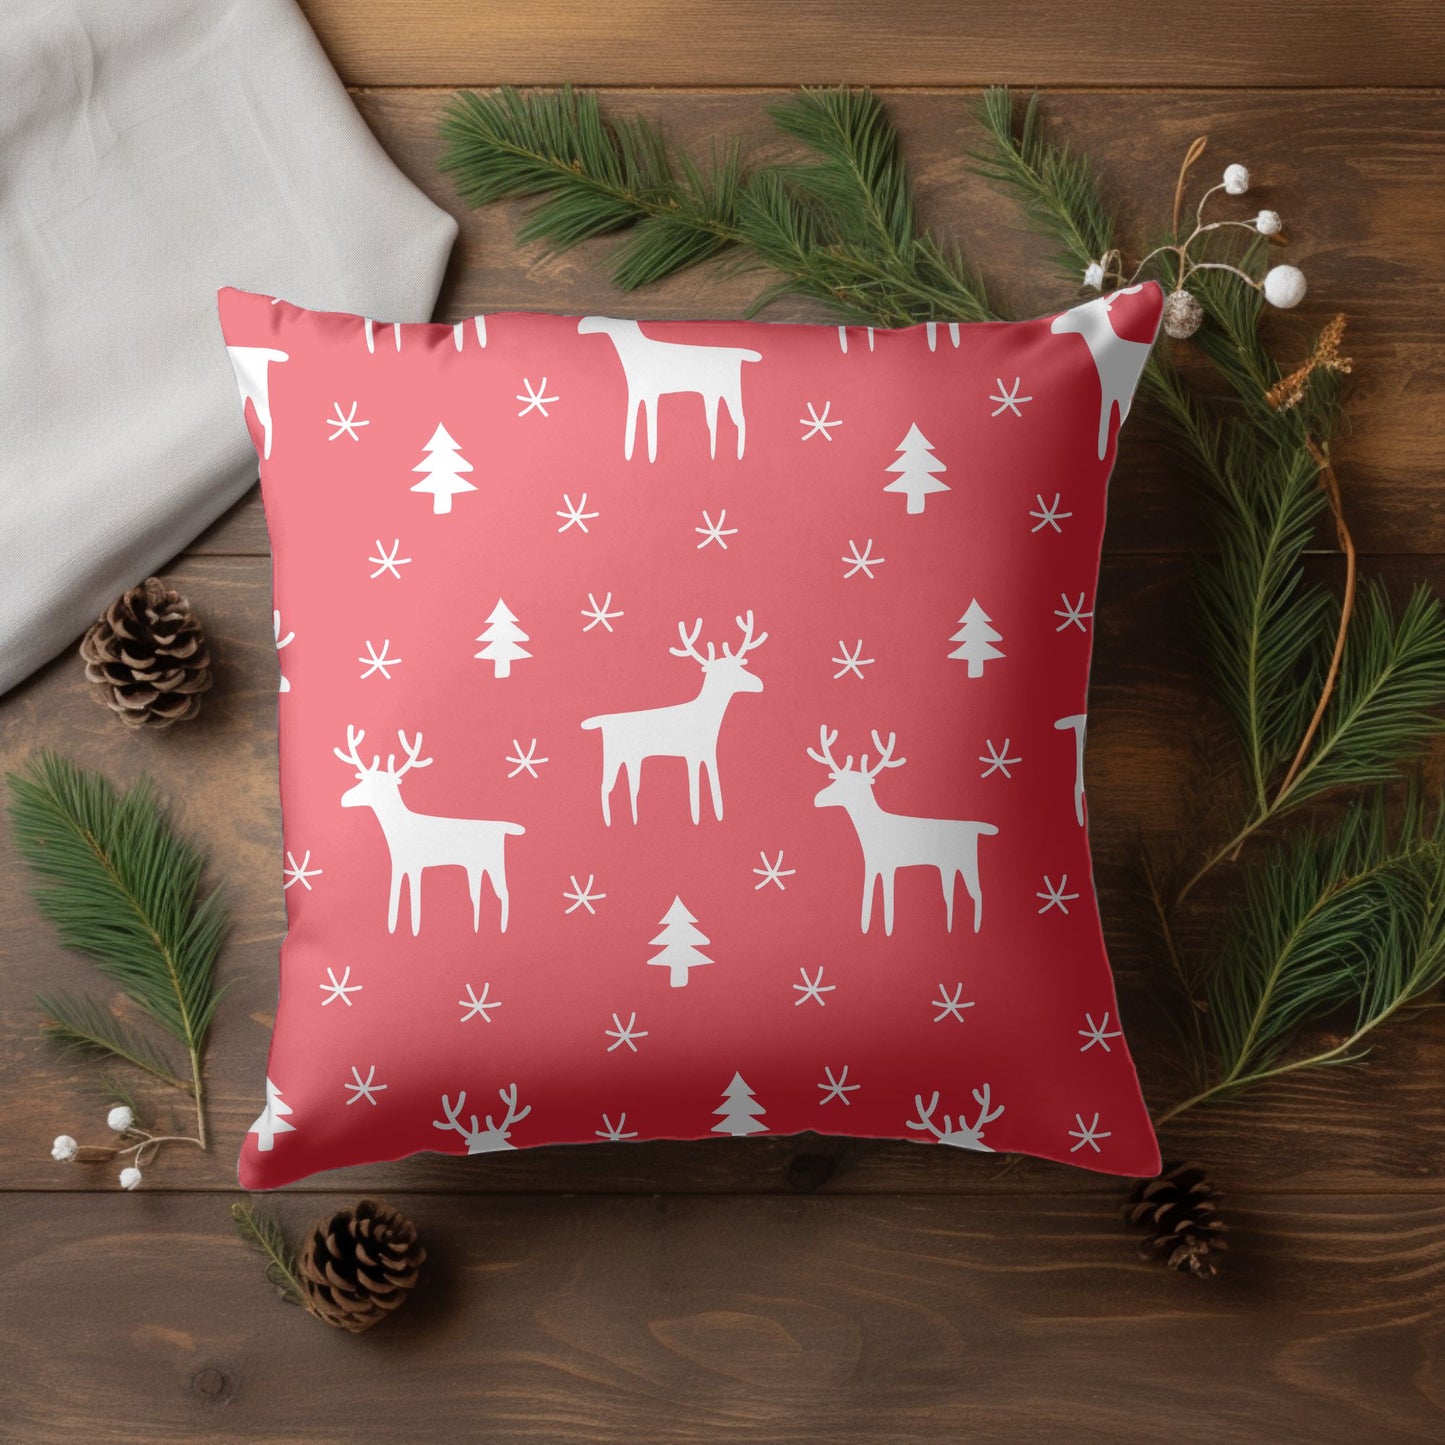 Holiday Decorative Pillow with Festive Red Design